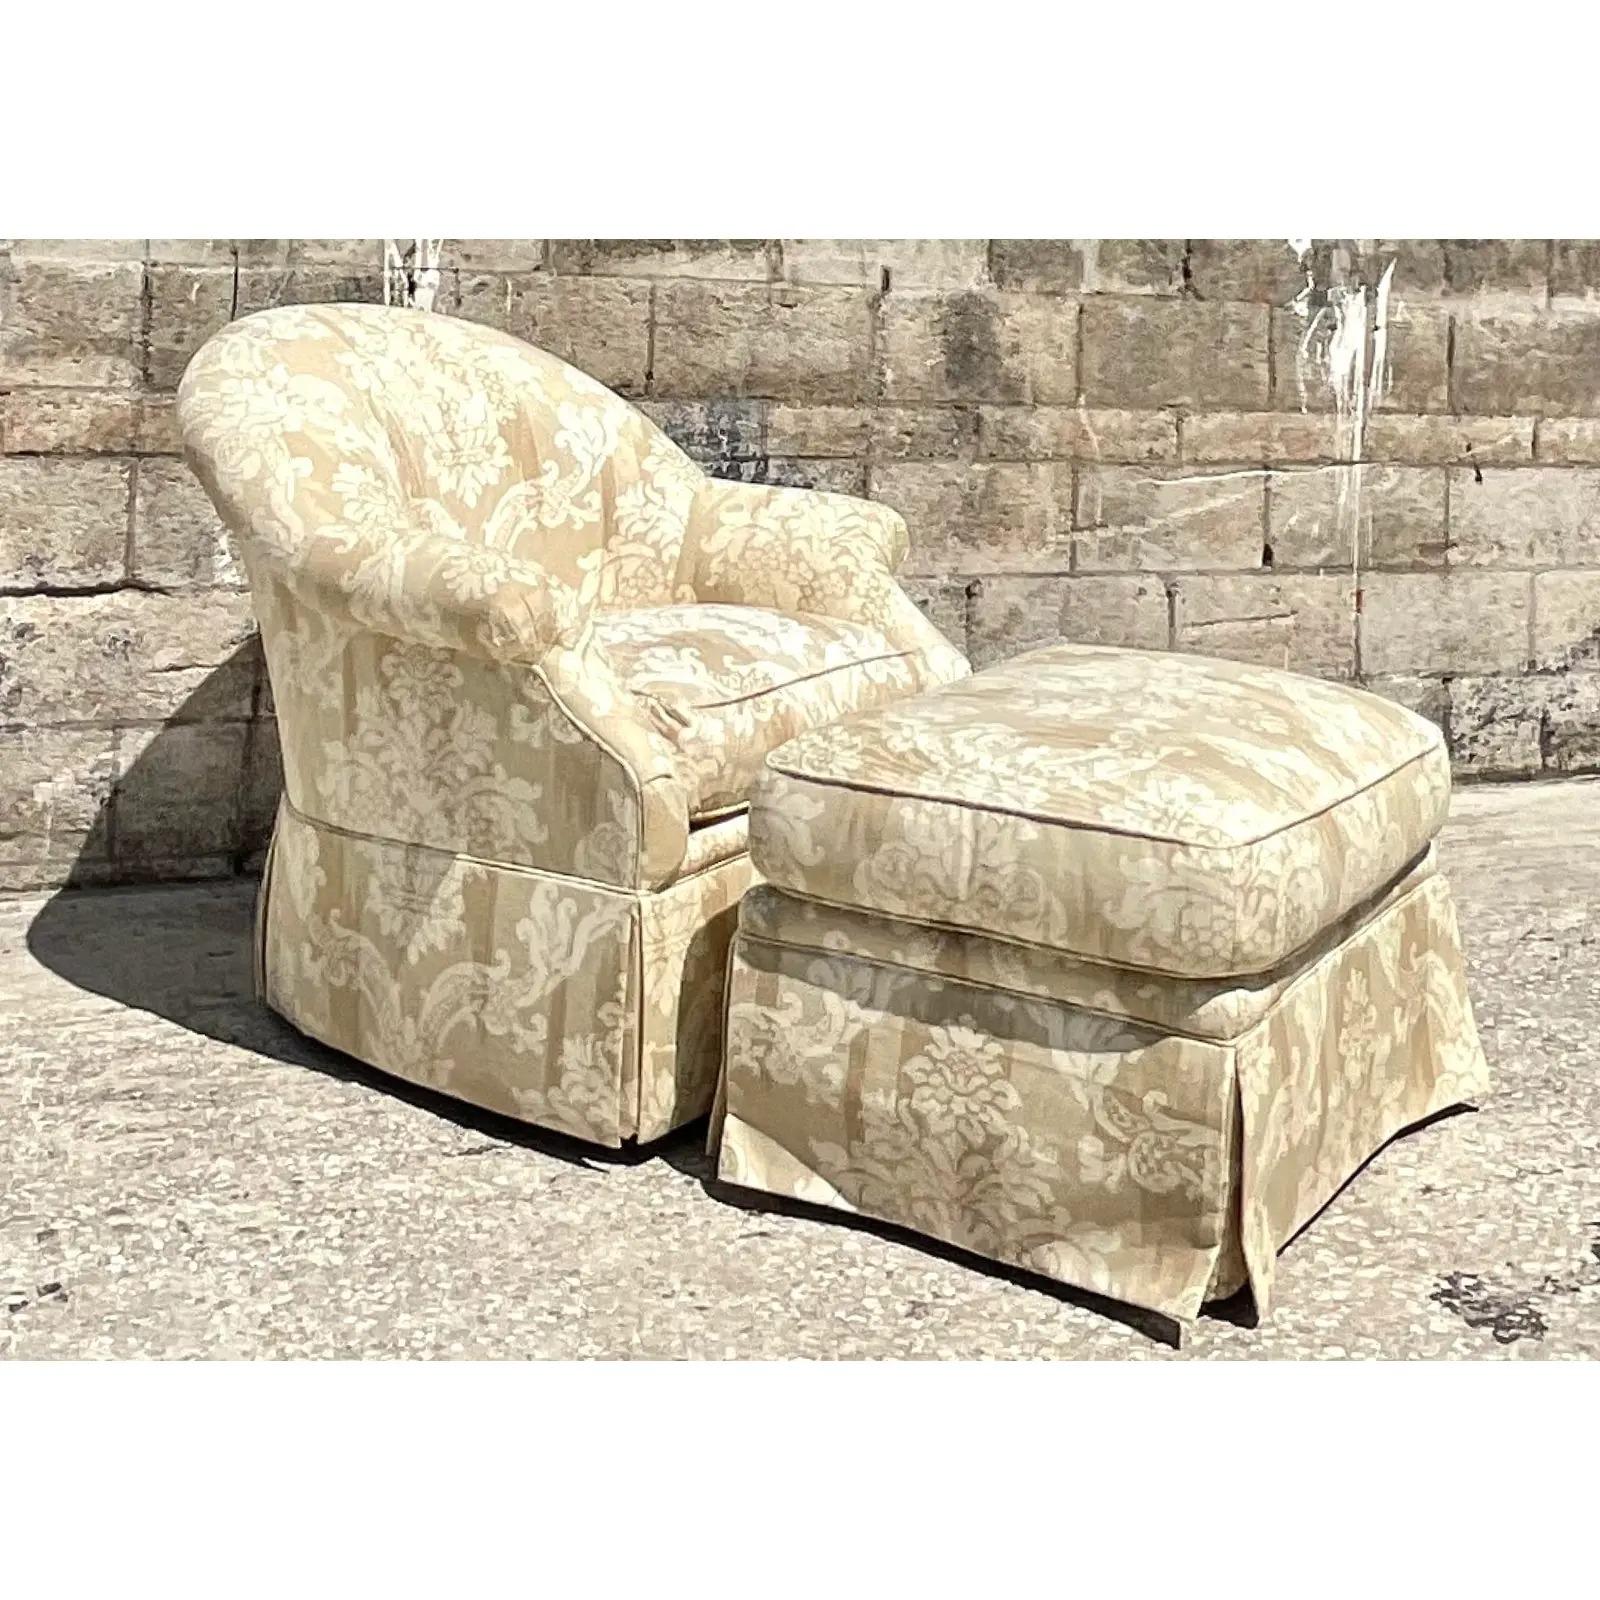 Fabulous vintage tufted chair and ottoman. Made by the iconic Kravet group. Beautiful printed upholstery in a fleur de lys design. Acquired from a Palm Beach estate.